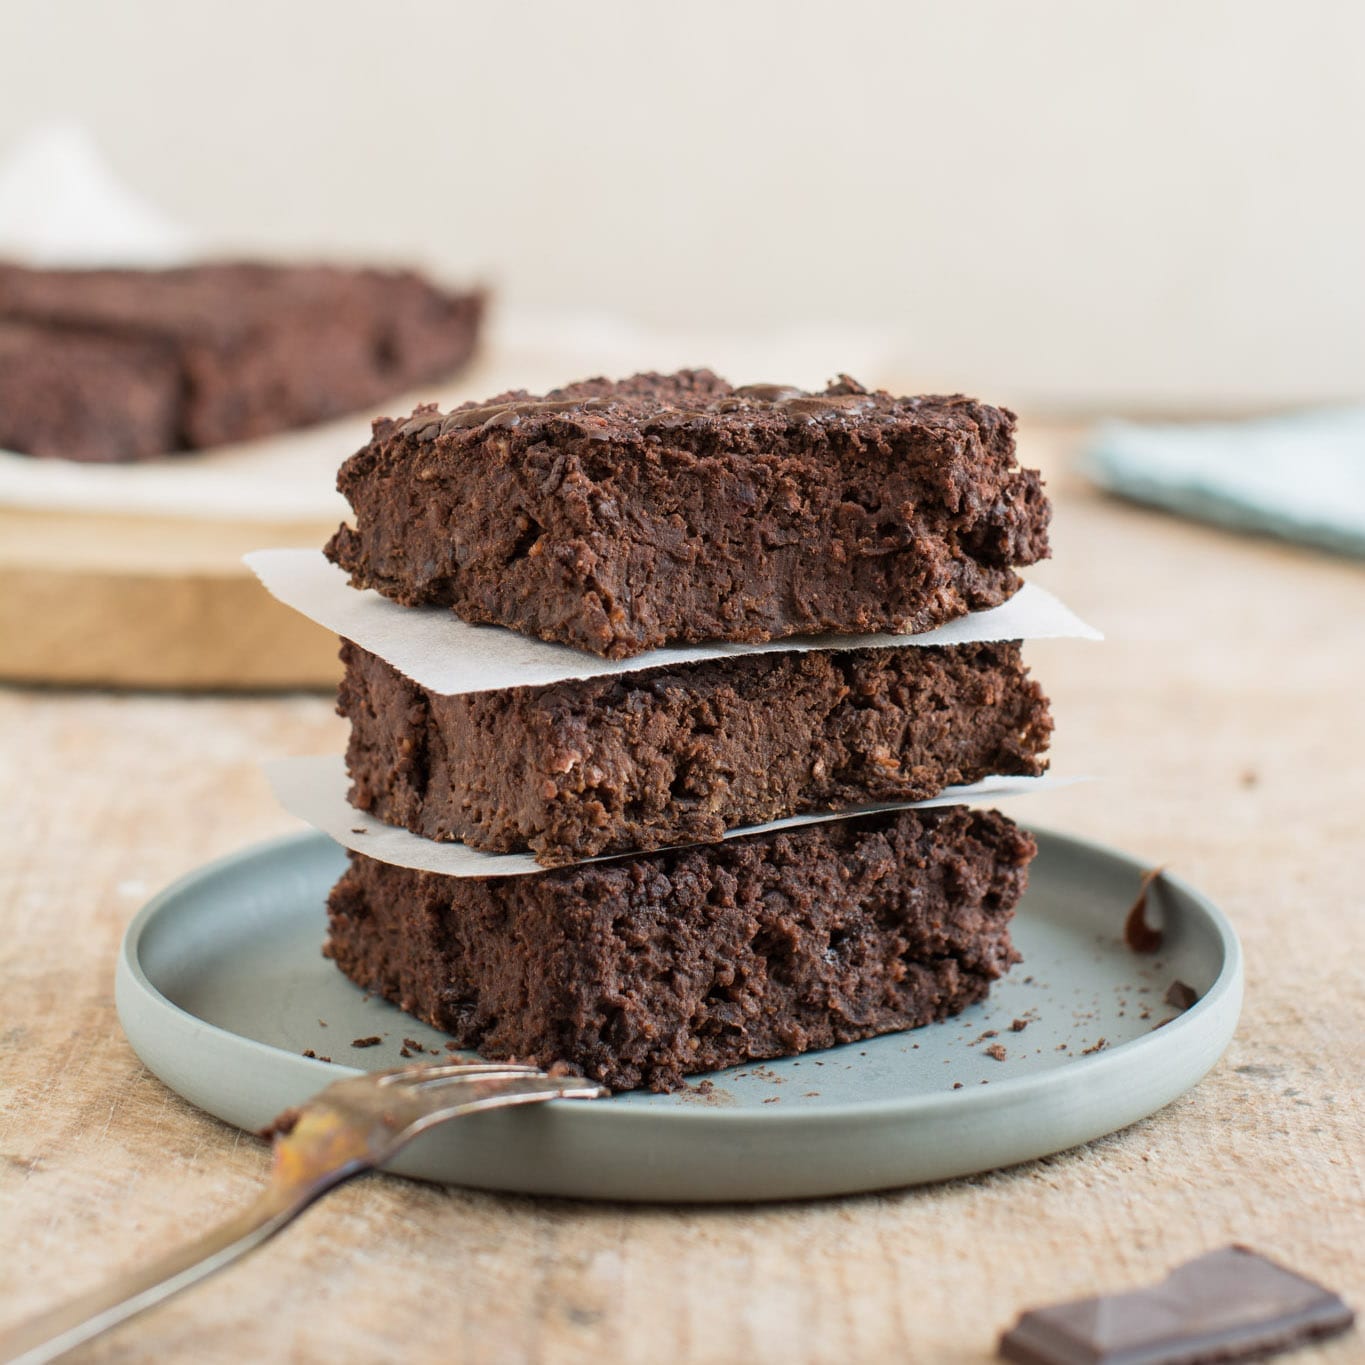 Soft and fudgy whole food plant-based chocolate beet brownies that are gluten-free and exceptionally easy to make. You’ll only need a food processor and 10 minutes of your time.